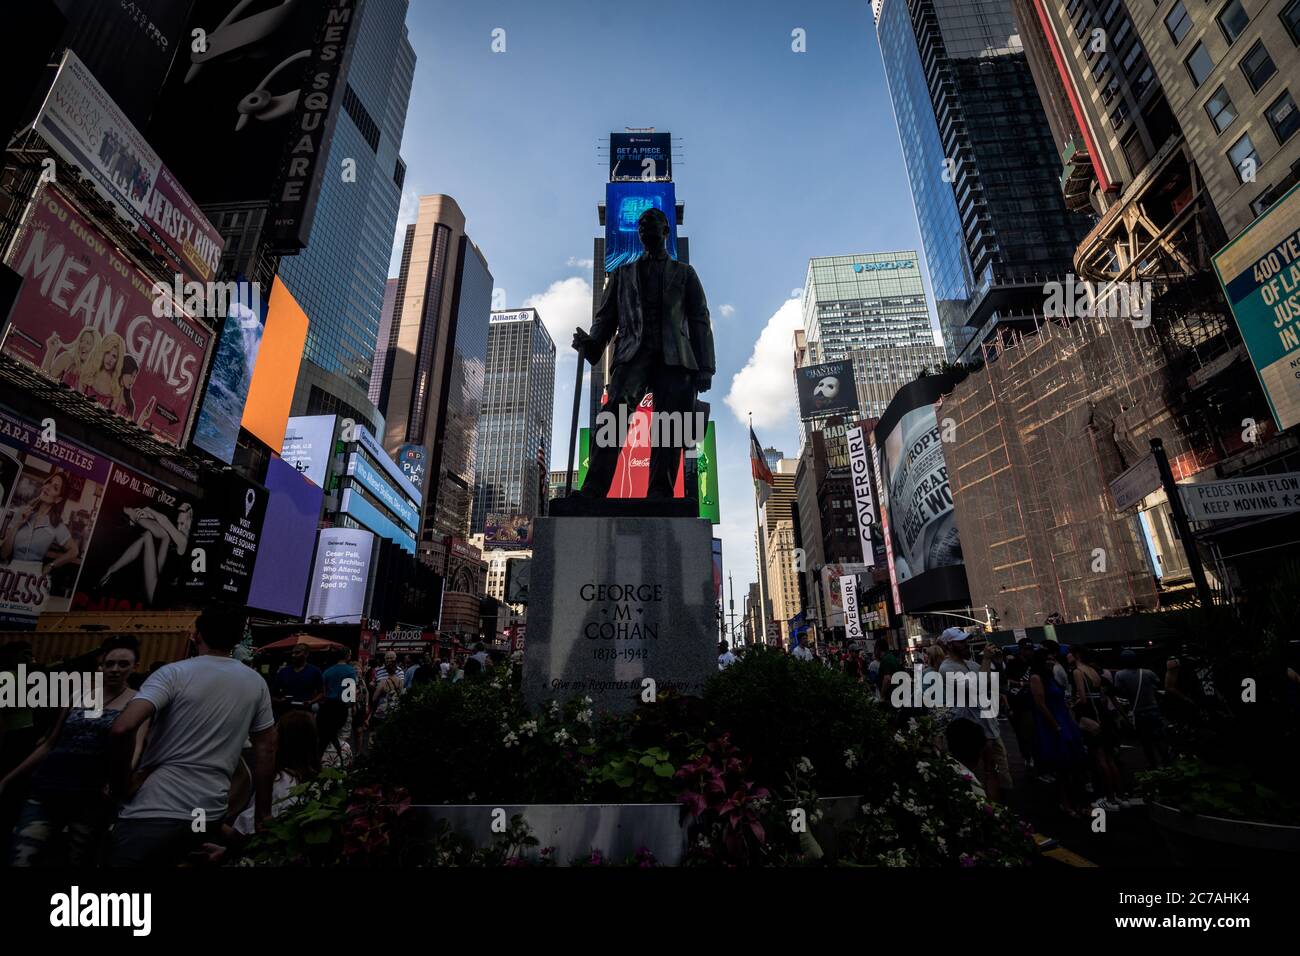 New York City, NY, USA - July 20, 2019: Times Square statue depicting composer, playwright, producer and actor George M. Cohan Stock Photo